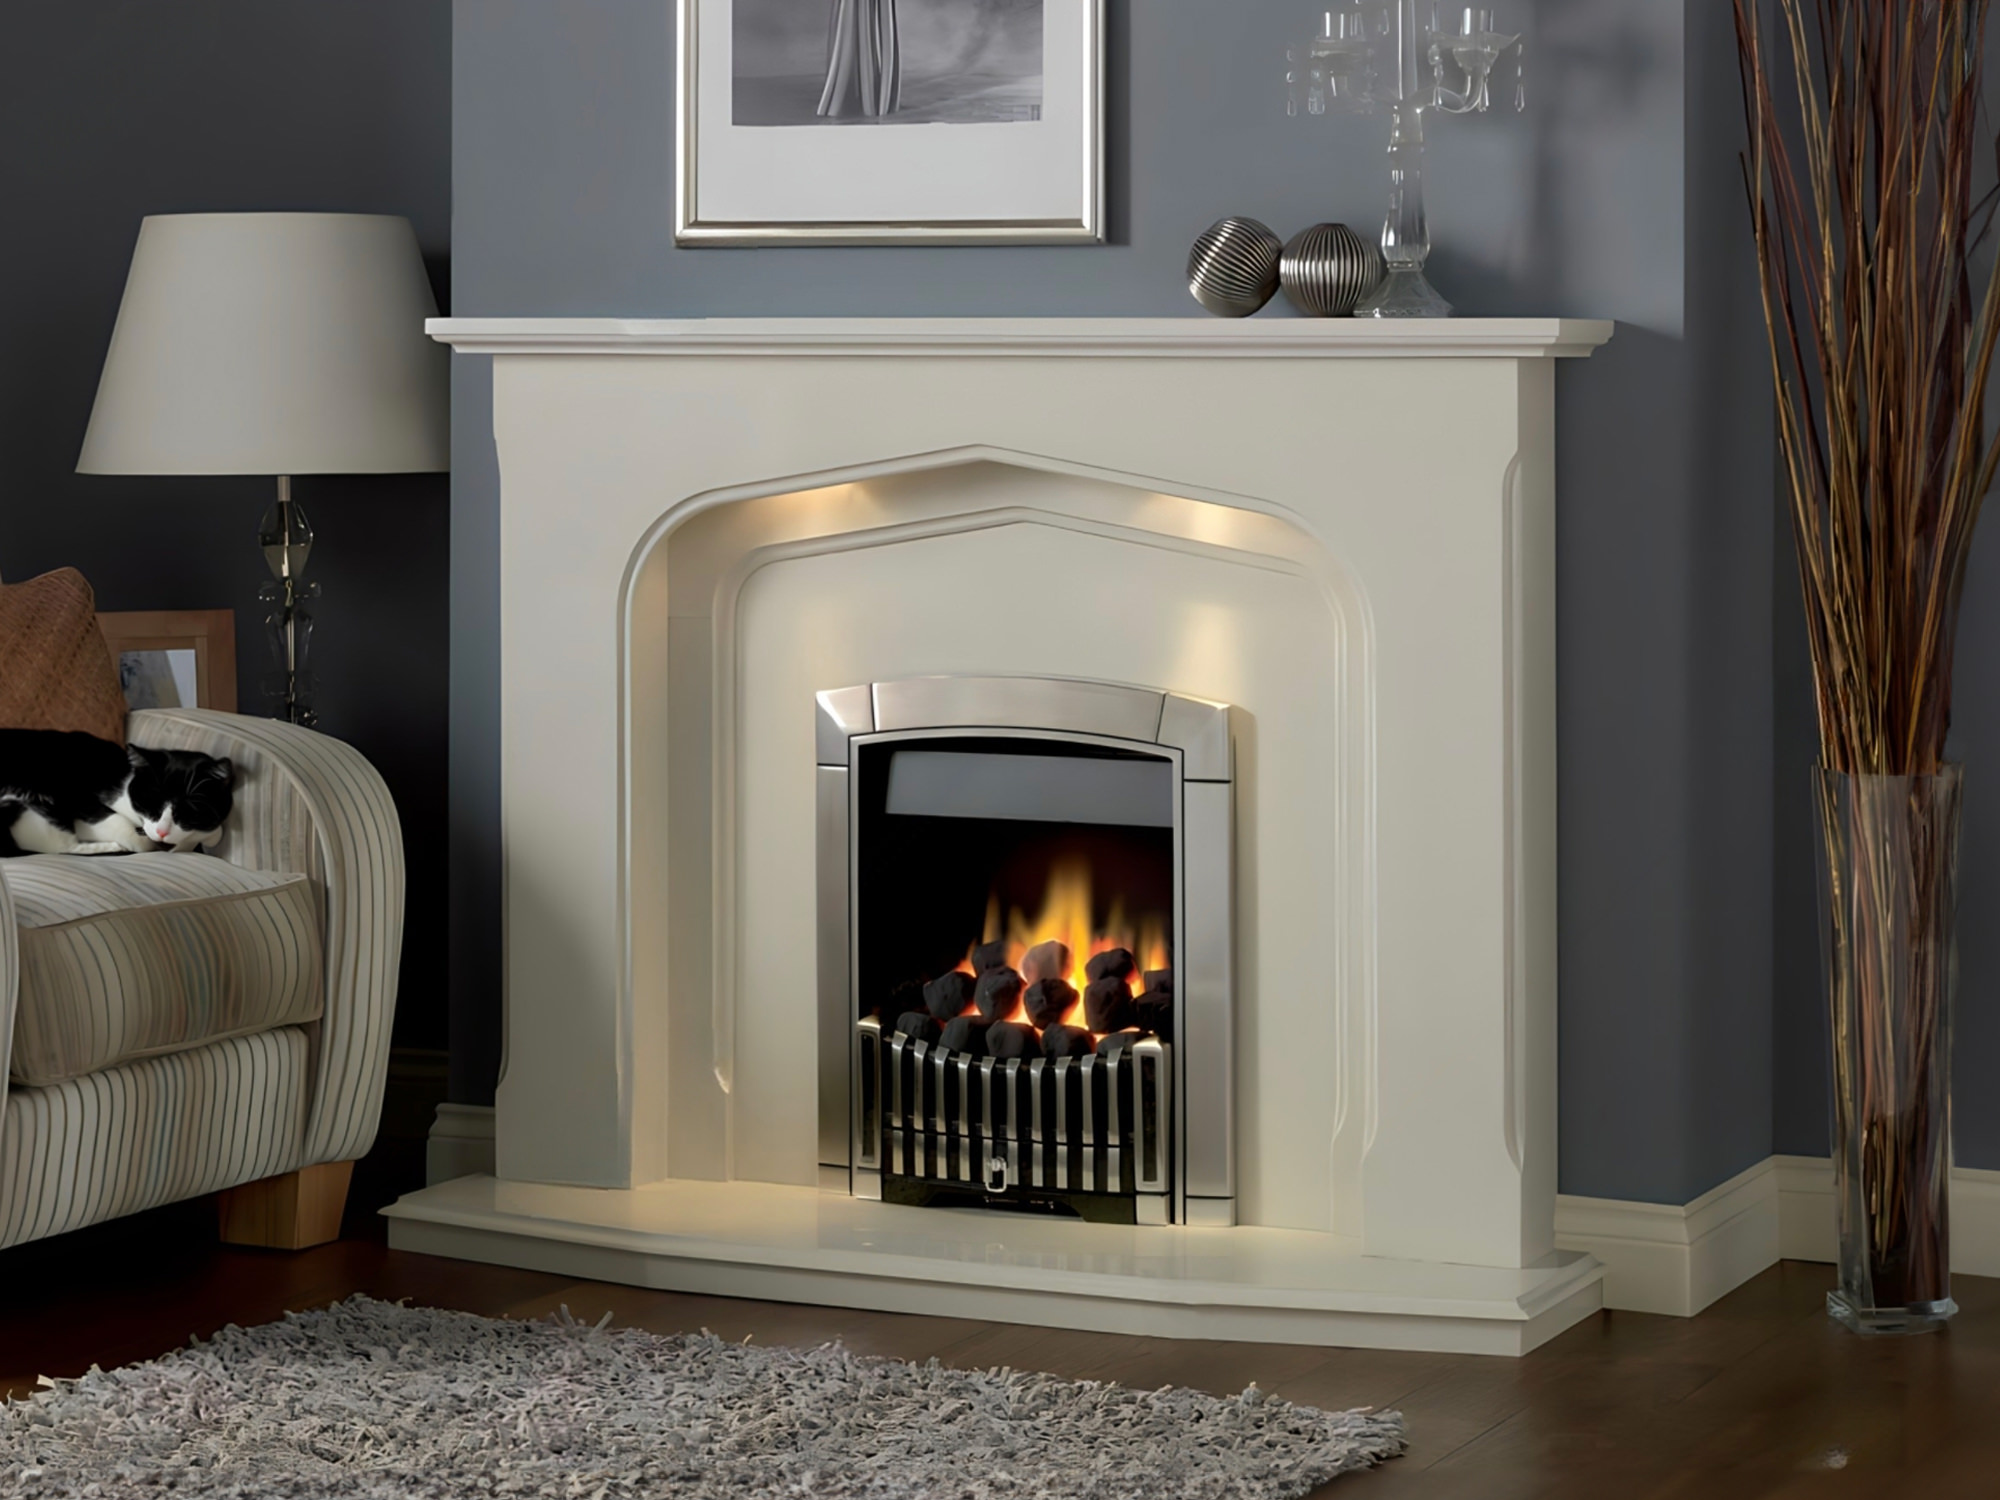 Designer Fireplaces' Lynford Marble Fireplace